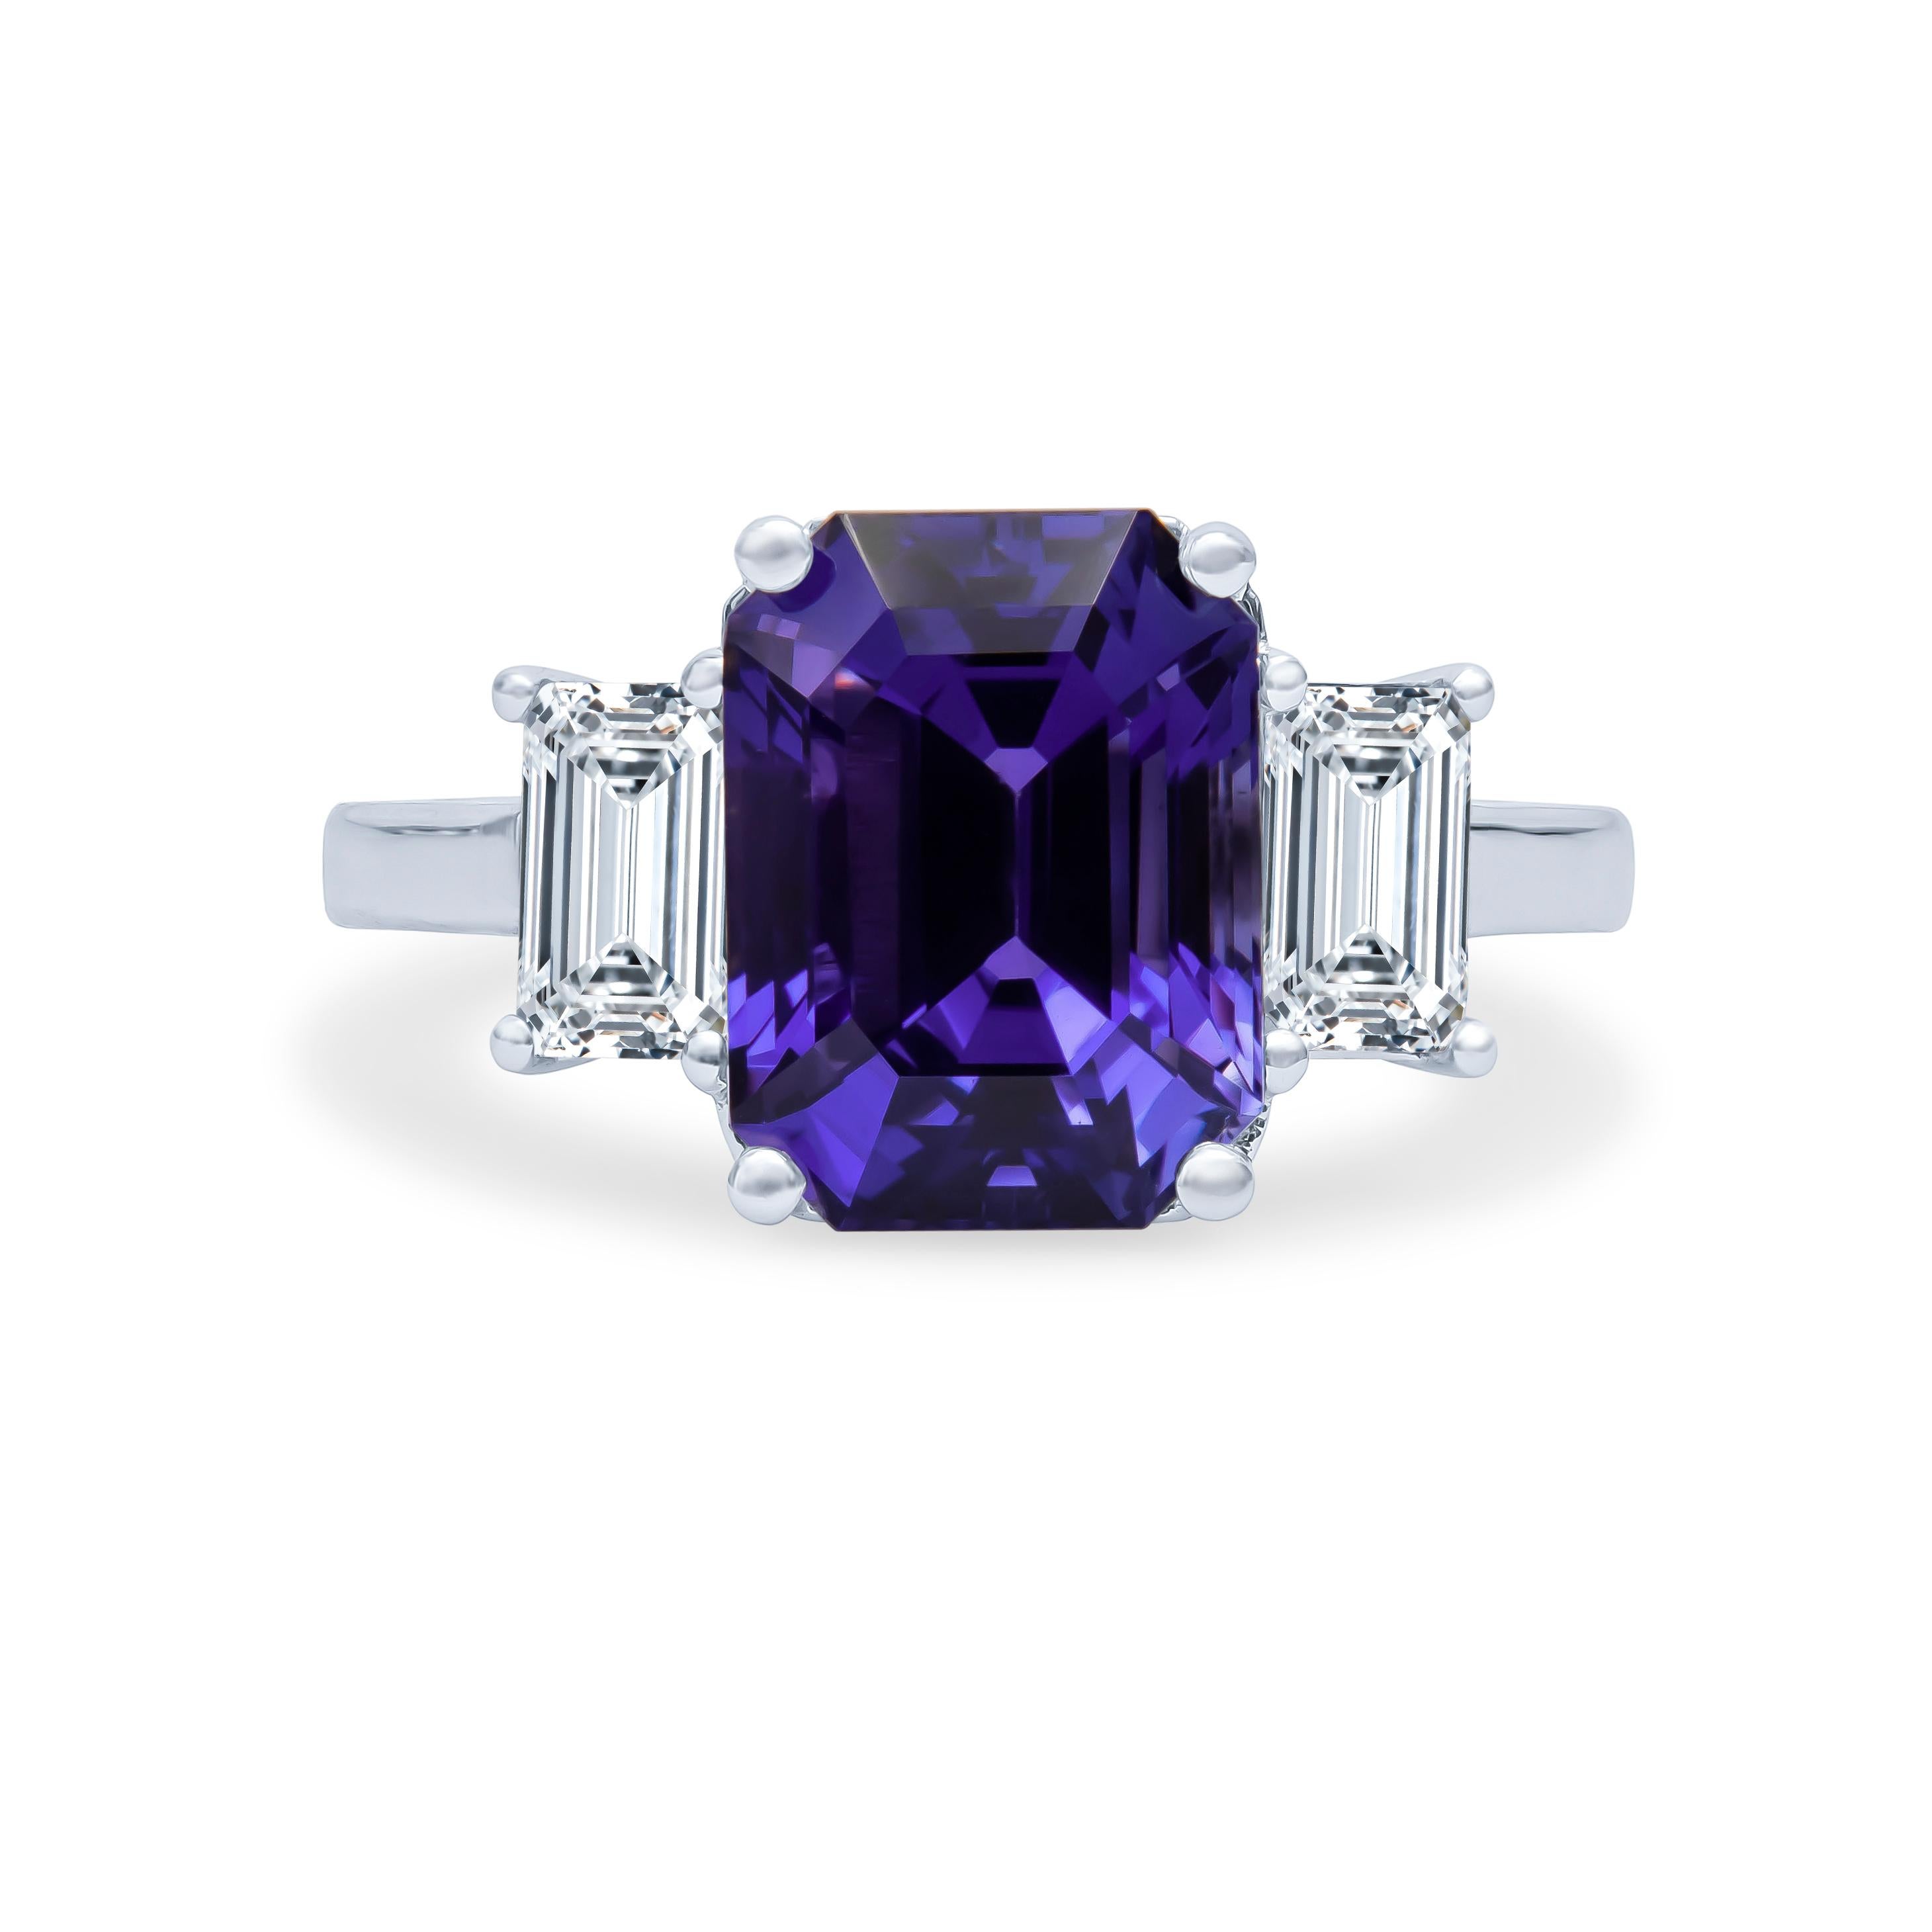 5.87 Carat total natural violetish blue and pinkish purple color-change sapphire, no-heat Sri Lanka origin (AGL report), set in a platinum 3-stone ring with two emerald cut natural diamonds weighing 0.98 carats total (GIA Reports - H VS1 & I VS2).